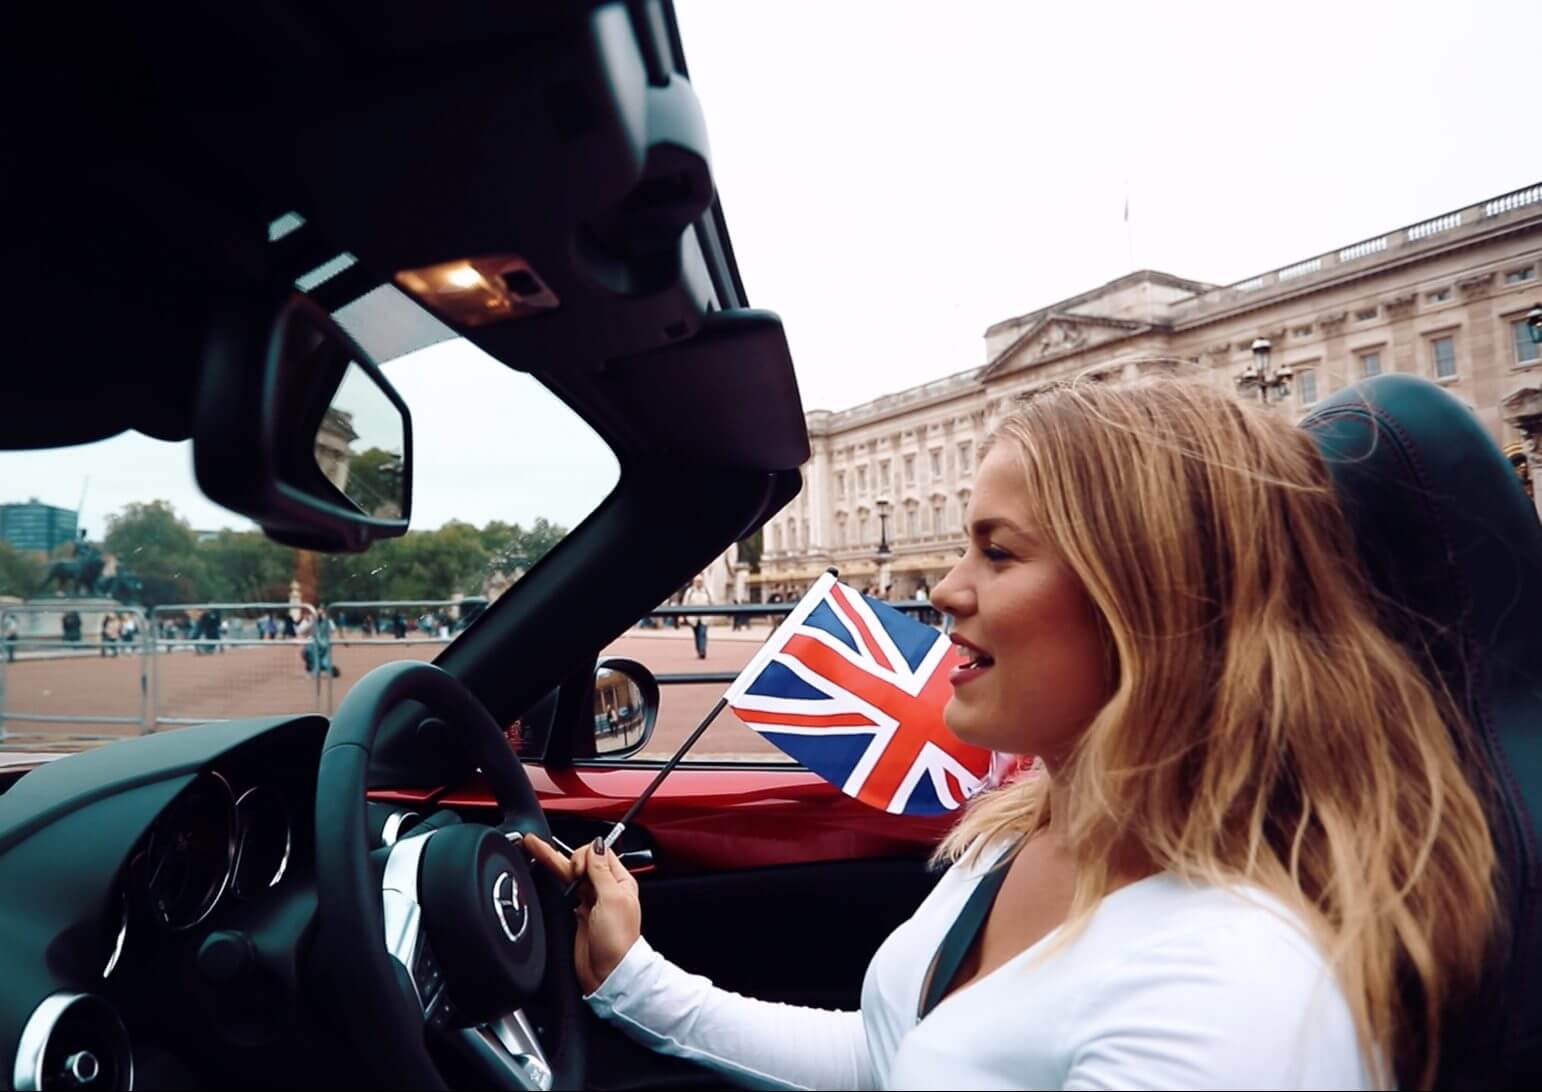 An open top car tour of London's iconic landmarks and landscapes